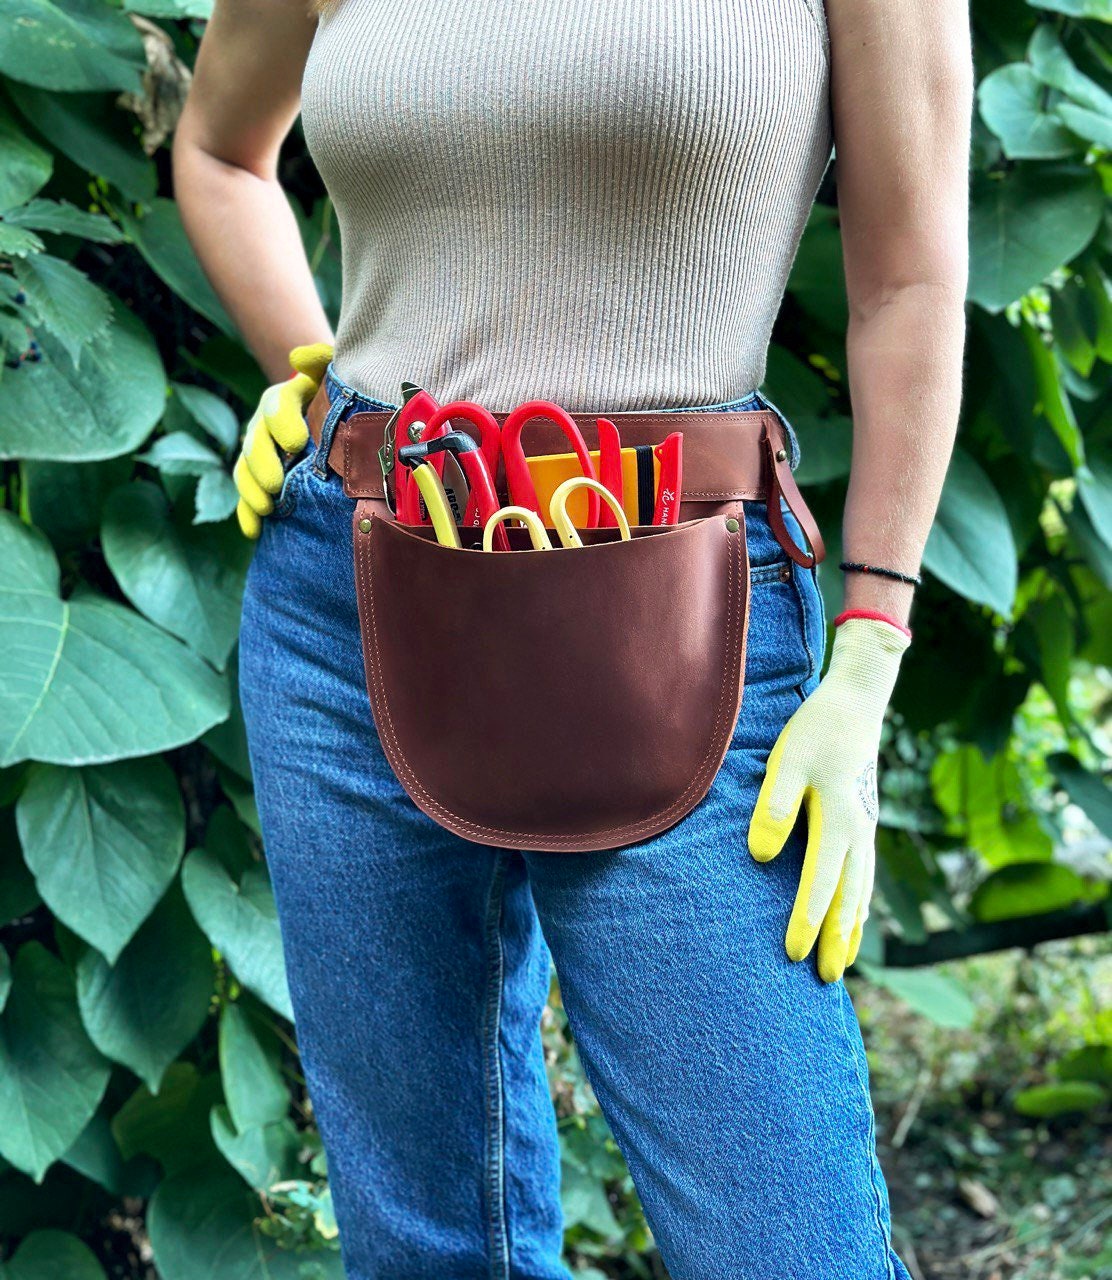 Tool Belt Pouches, 5-Pockets Single Side Tool Belt Pouch, Tool pouch belt,  Utility Belt Bag, Tool be…See more Tool Belt Pouches, 5-Pockets Single Side